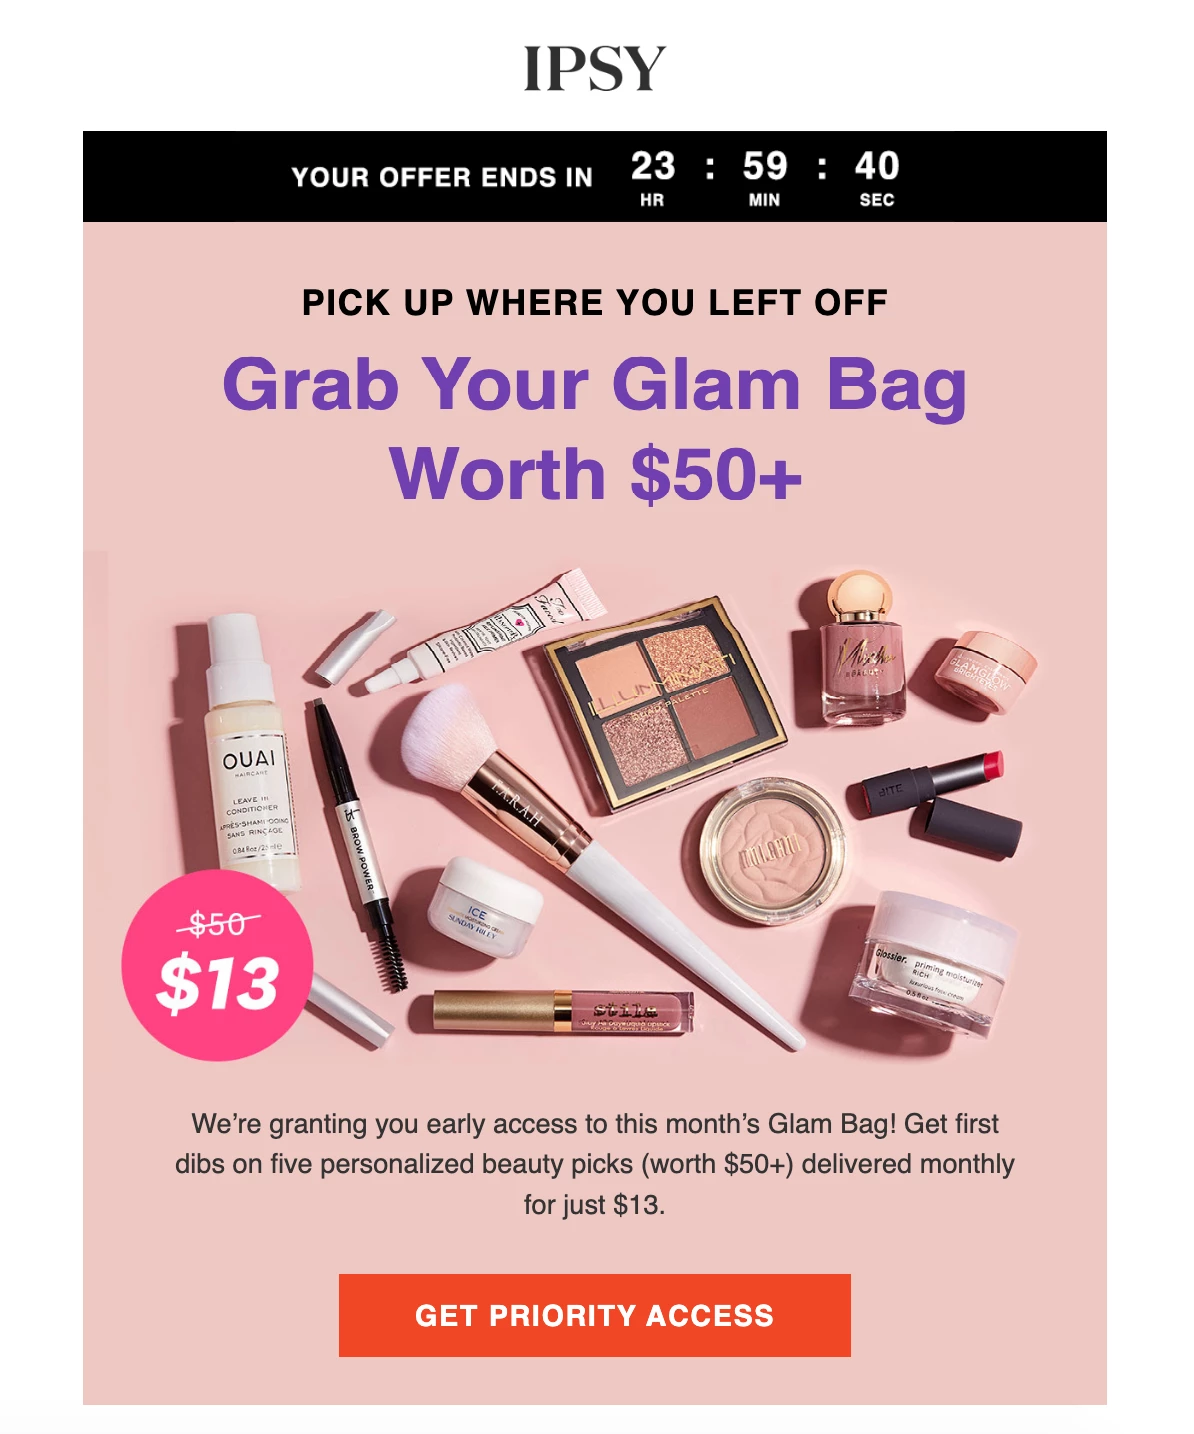 Abandoned cart email example from IPSY